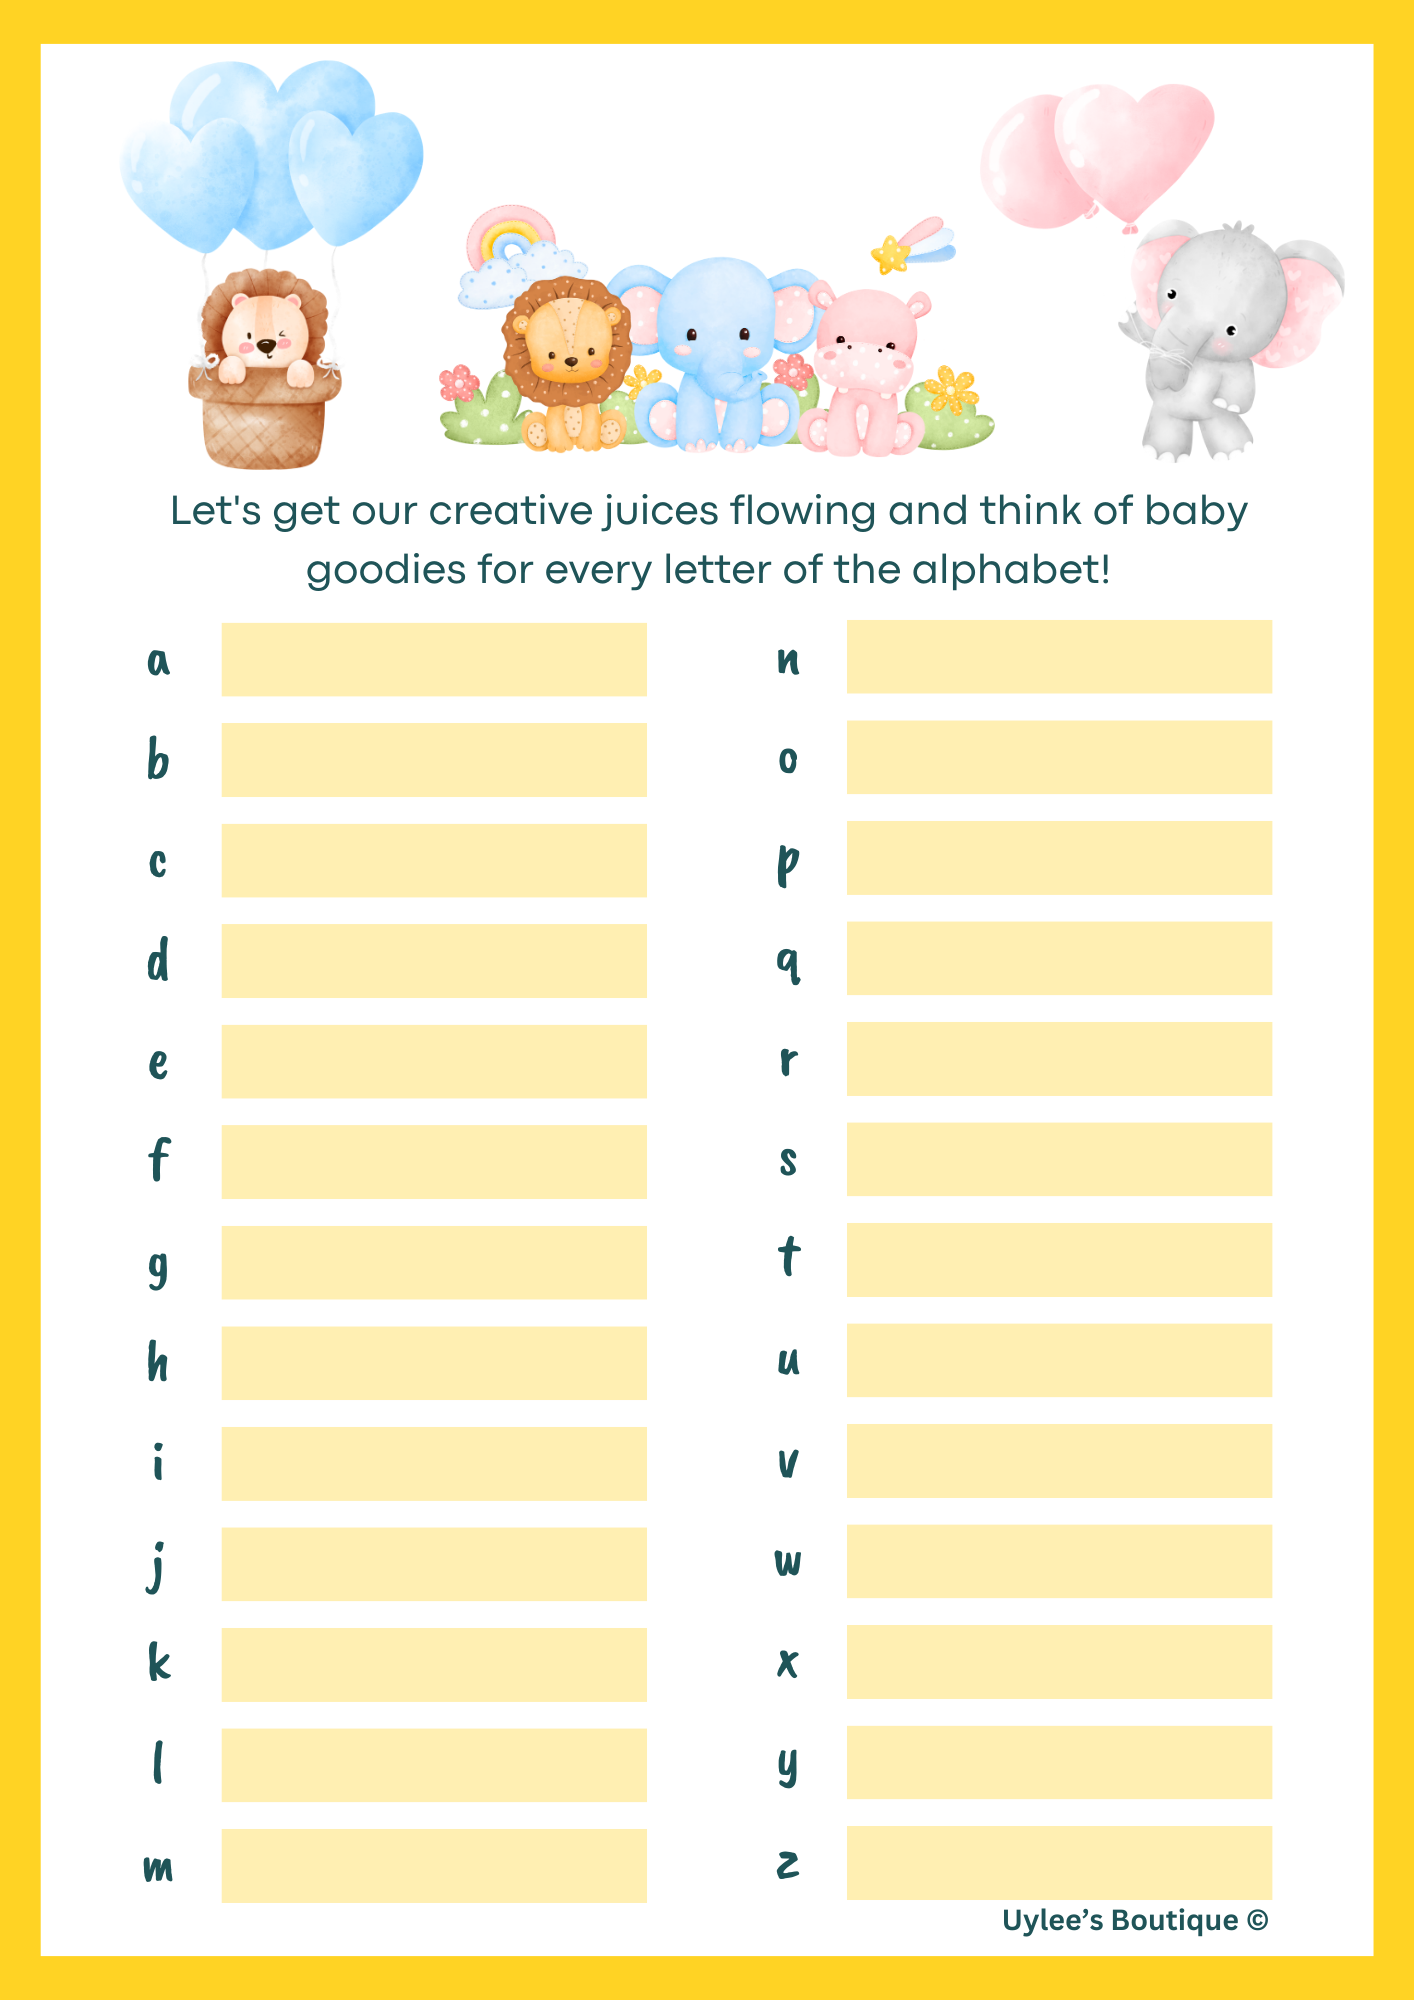 The A - Z Baby Items Challenge (Digital Download) is here to test your knowledge of all things baby!